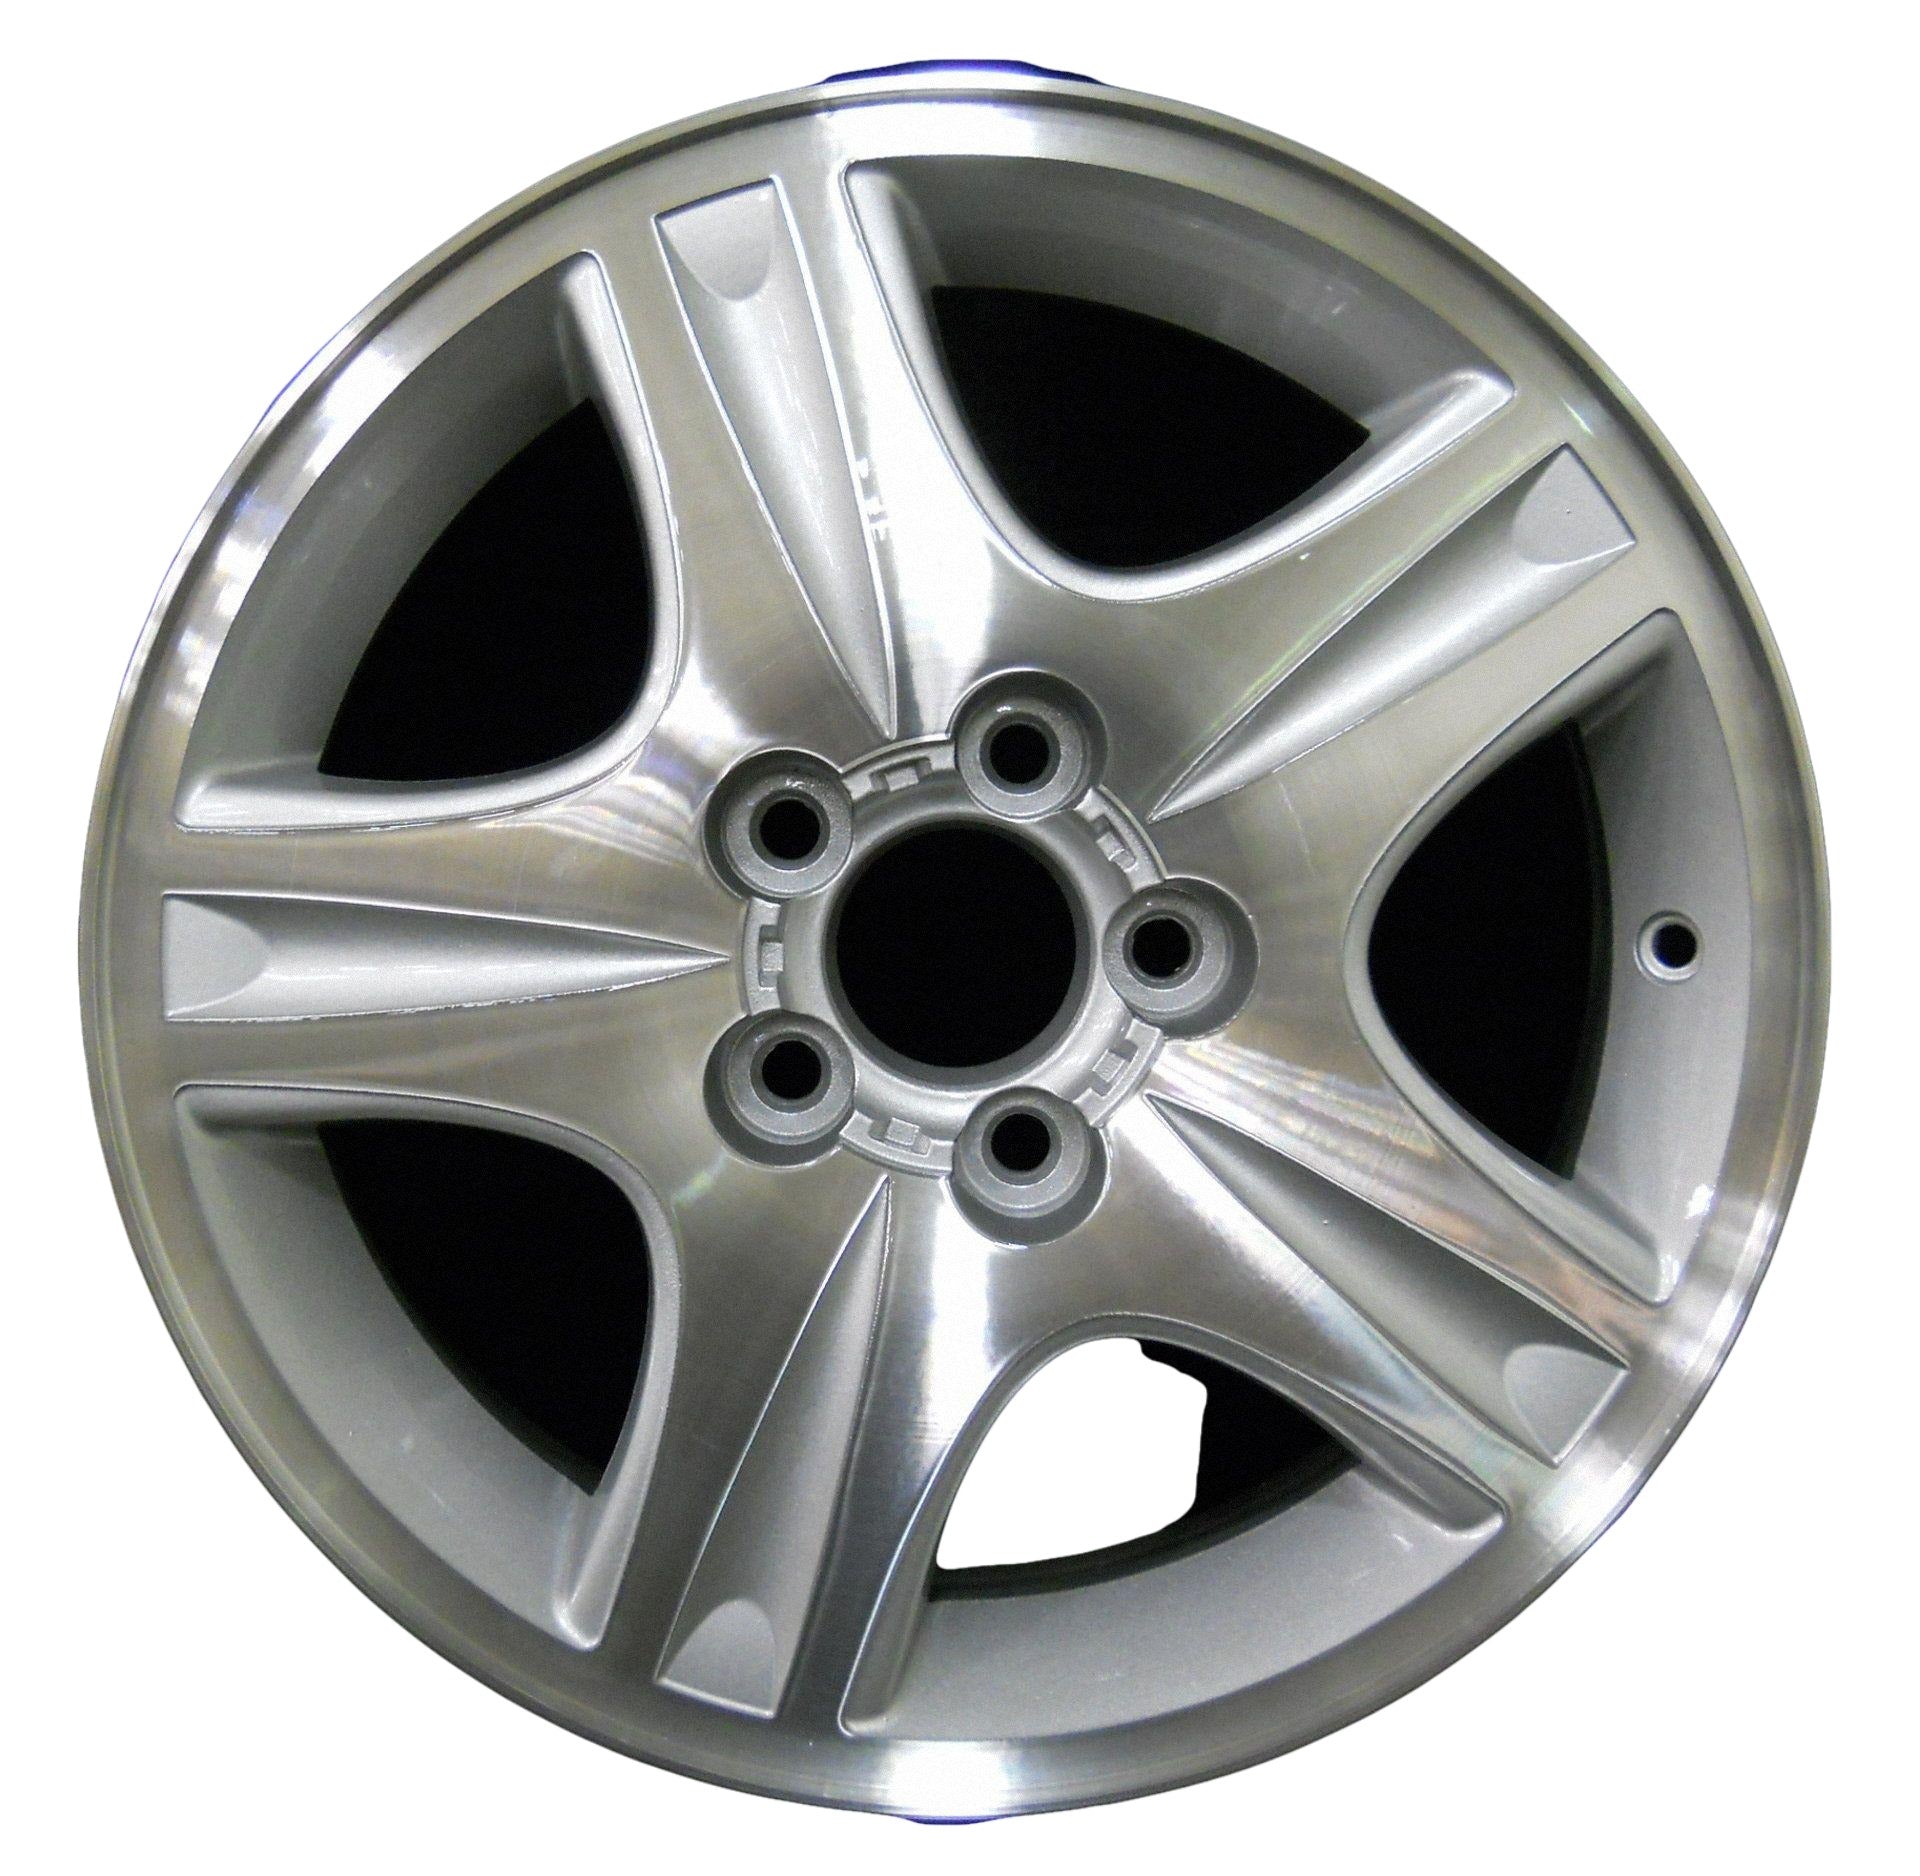 Ford Taurus  2000, 2001, 2002 Factory OEM Car Wheel Size 16x6 Alloy WAO.3385.PS13.MA